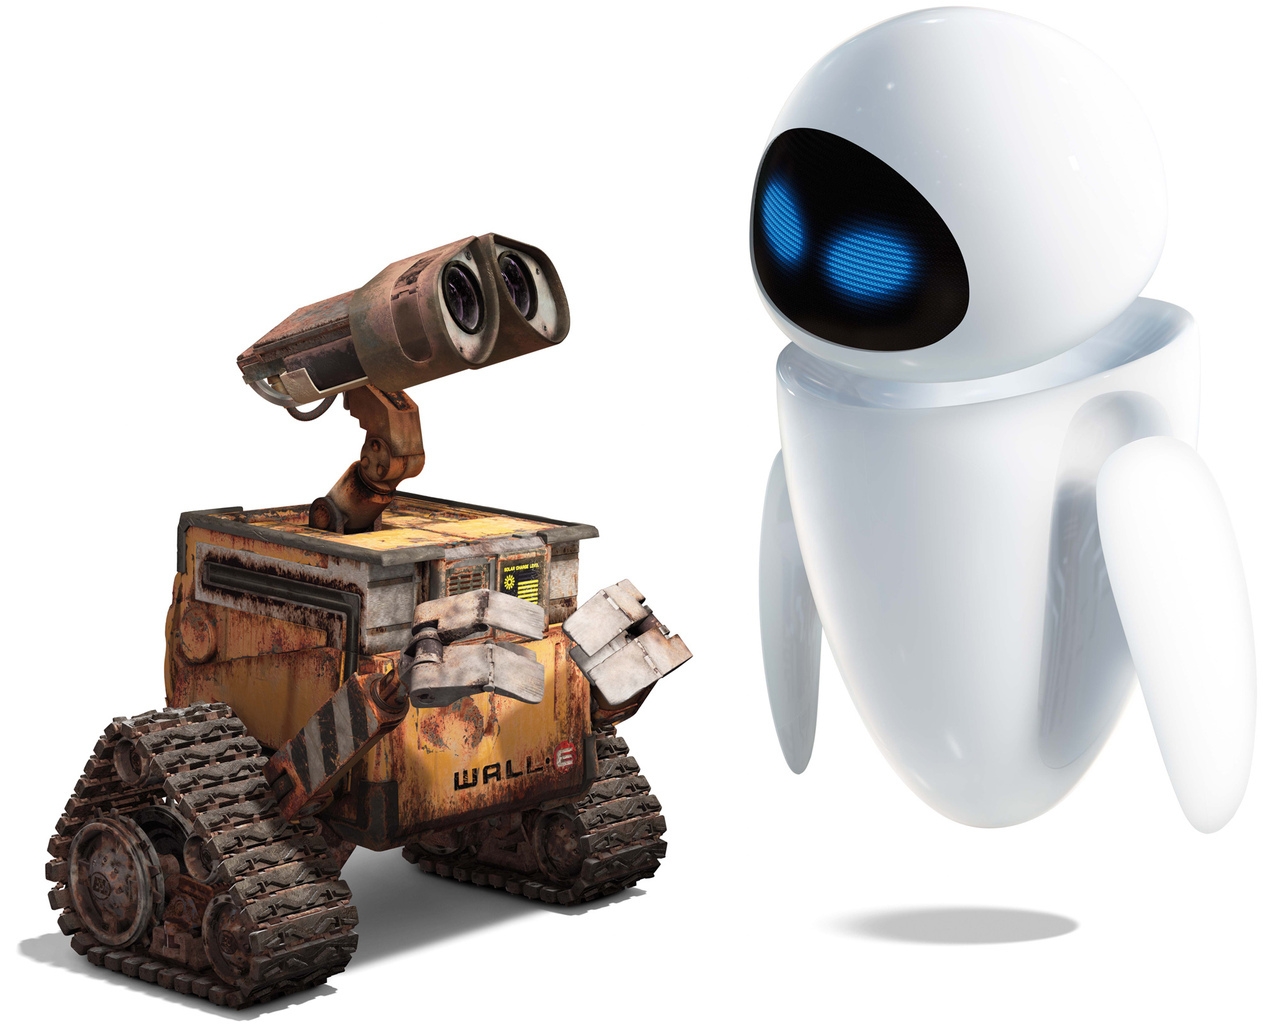 Walle Robots for 1280 x 1024 resolution